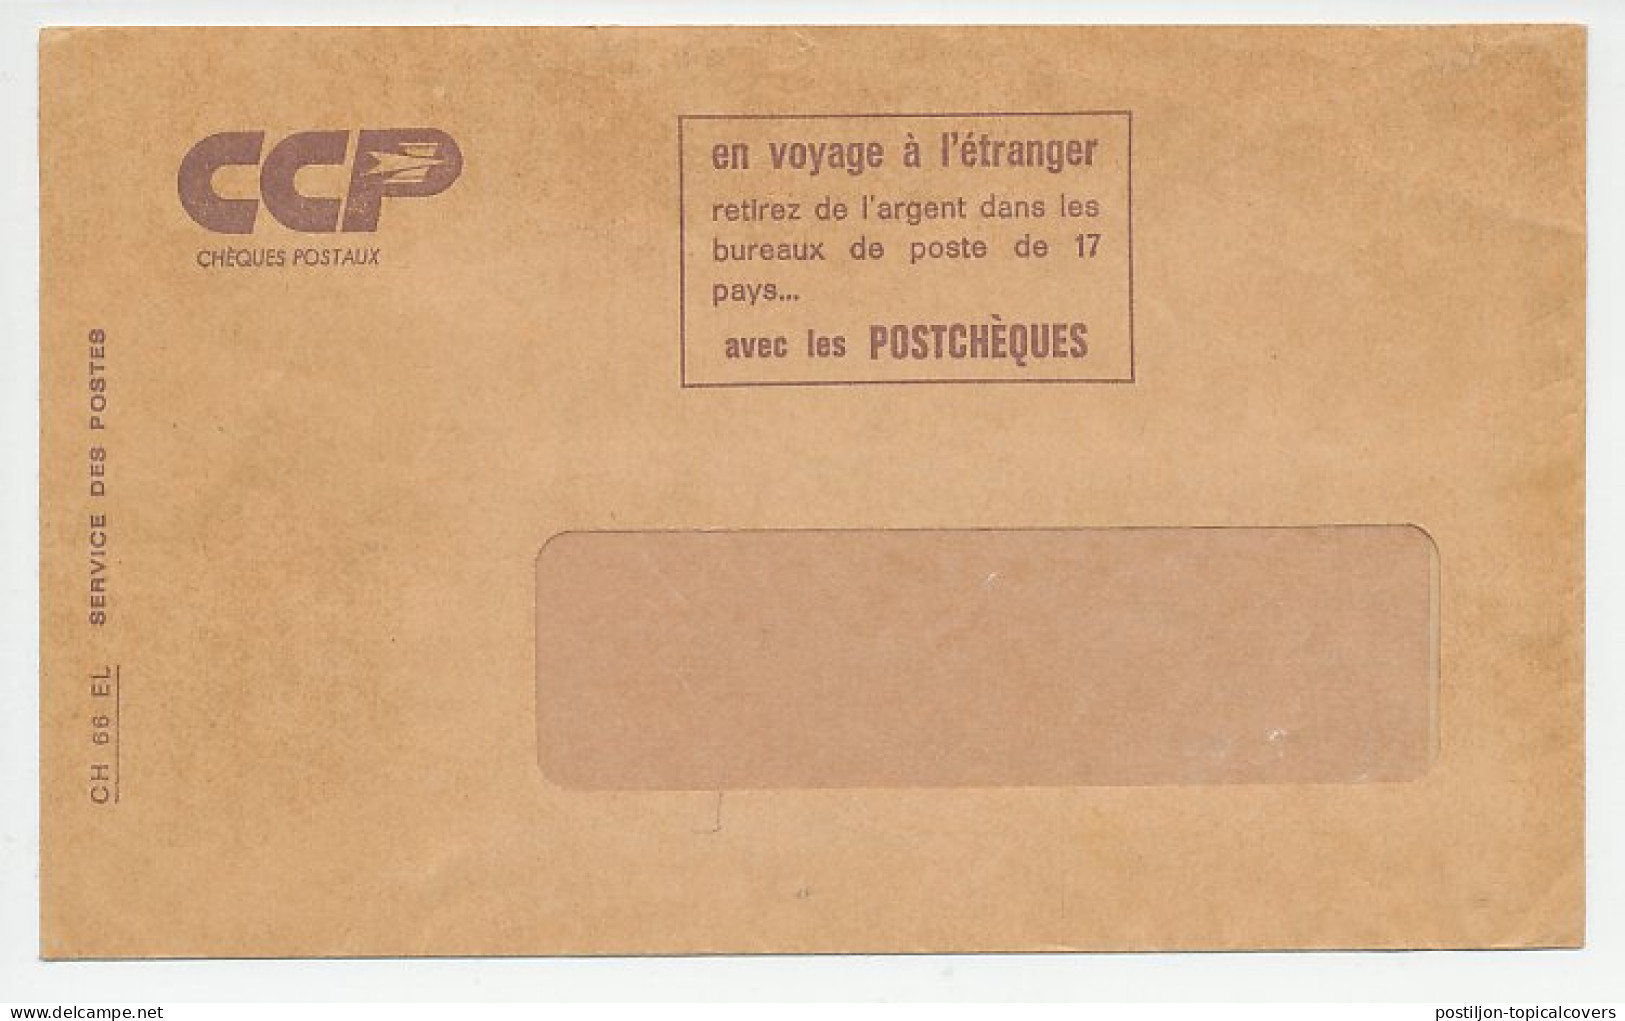 Postal Cheque Cover France Photographic Film - Fotografie